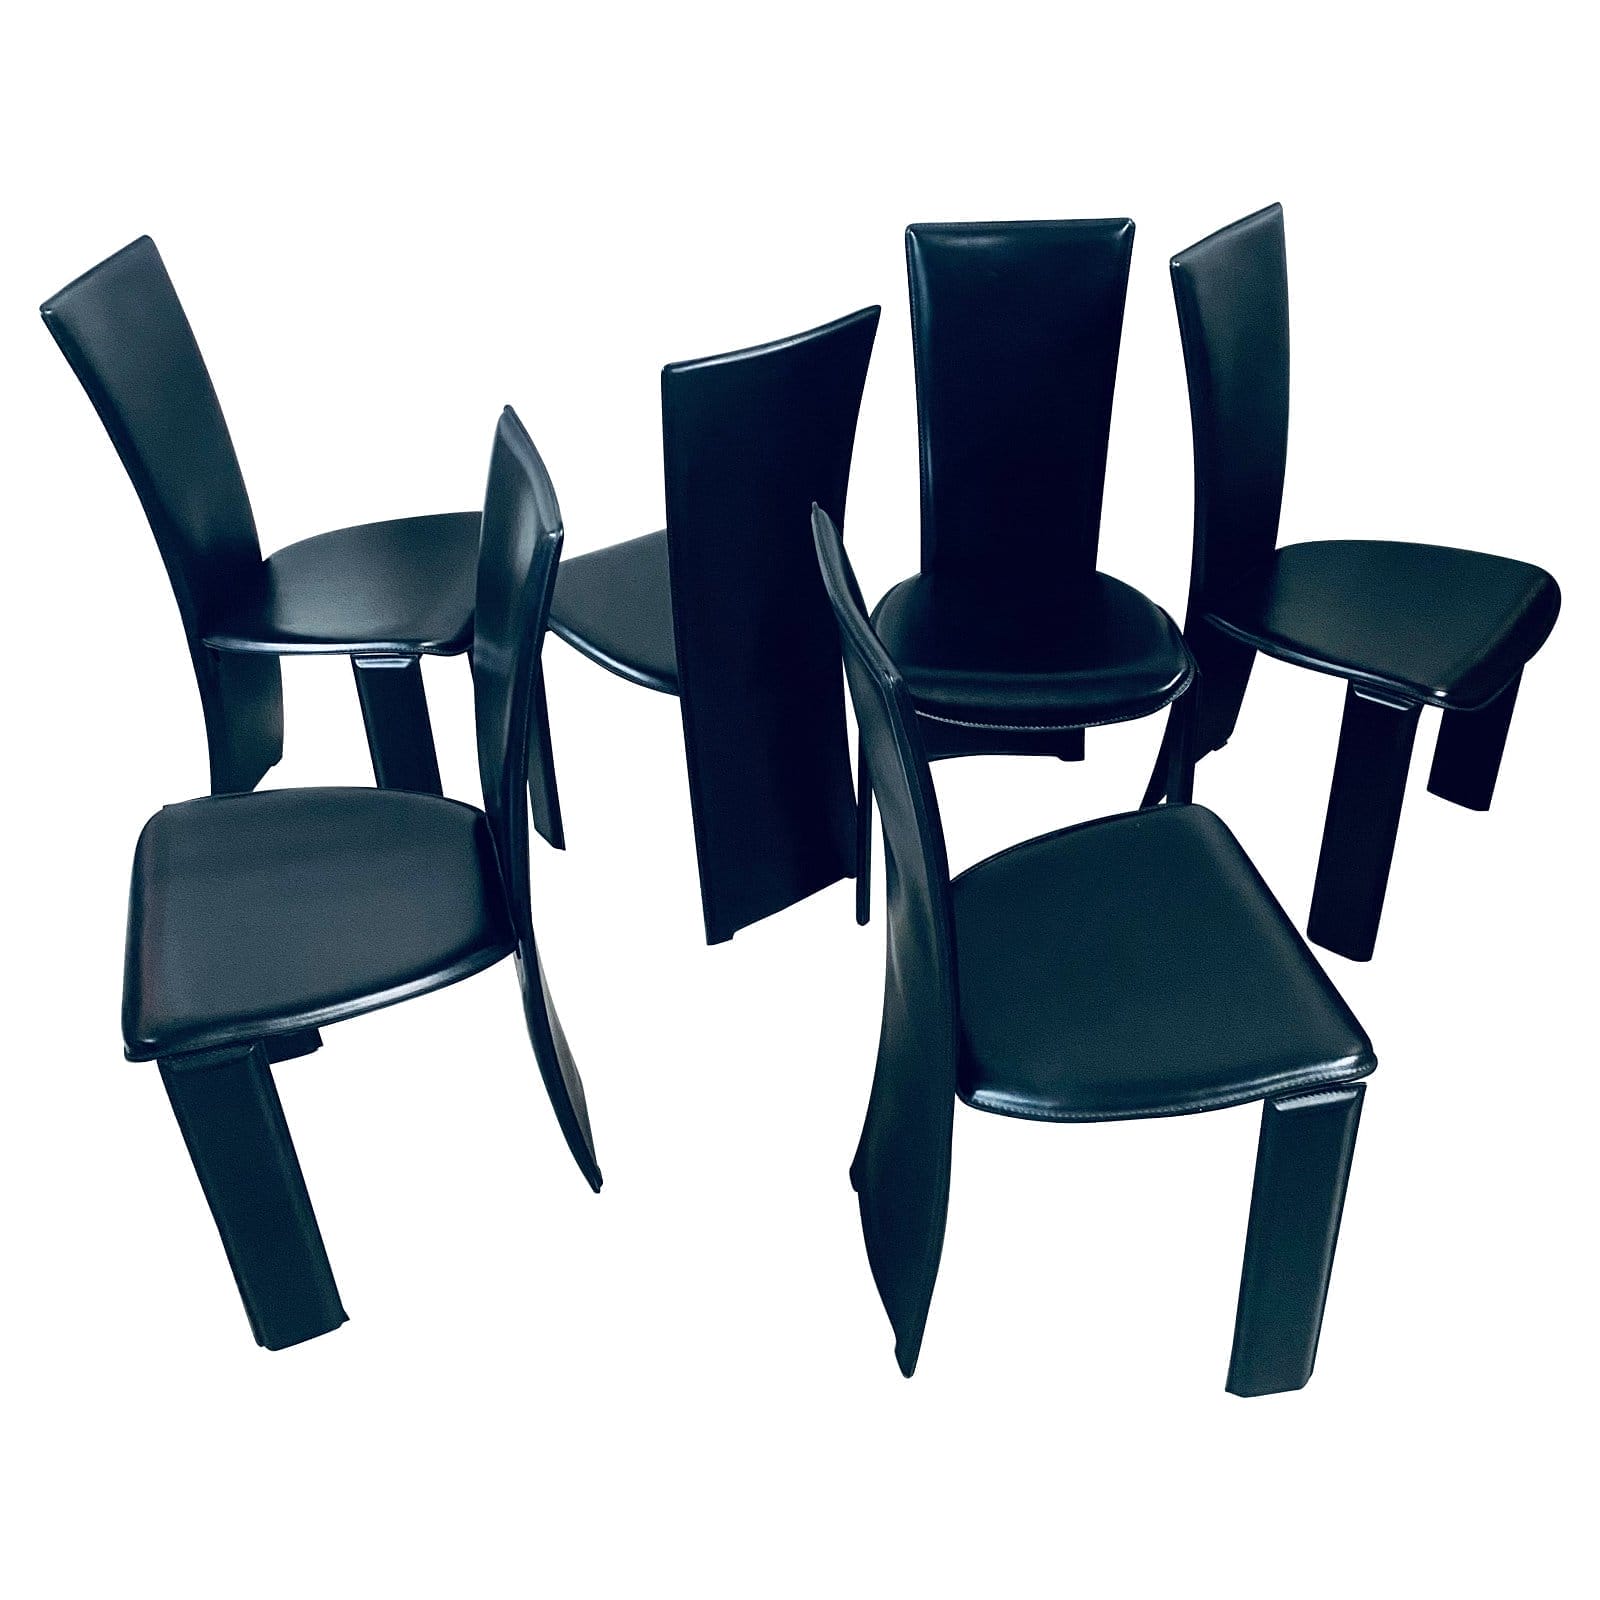 Display Images to View 6 x Black Leather Tripot Dining Chairs by Pietro Costantini, Italy 1980.